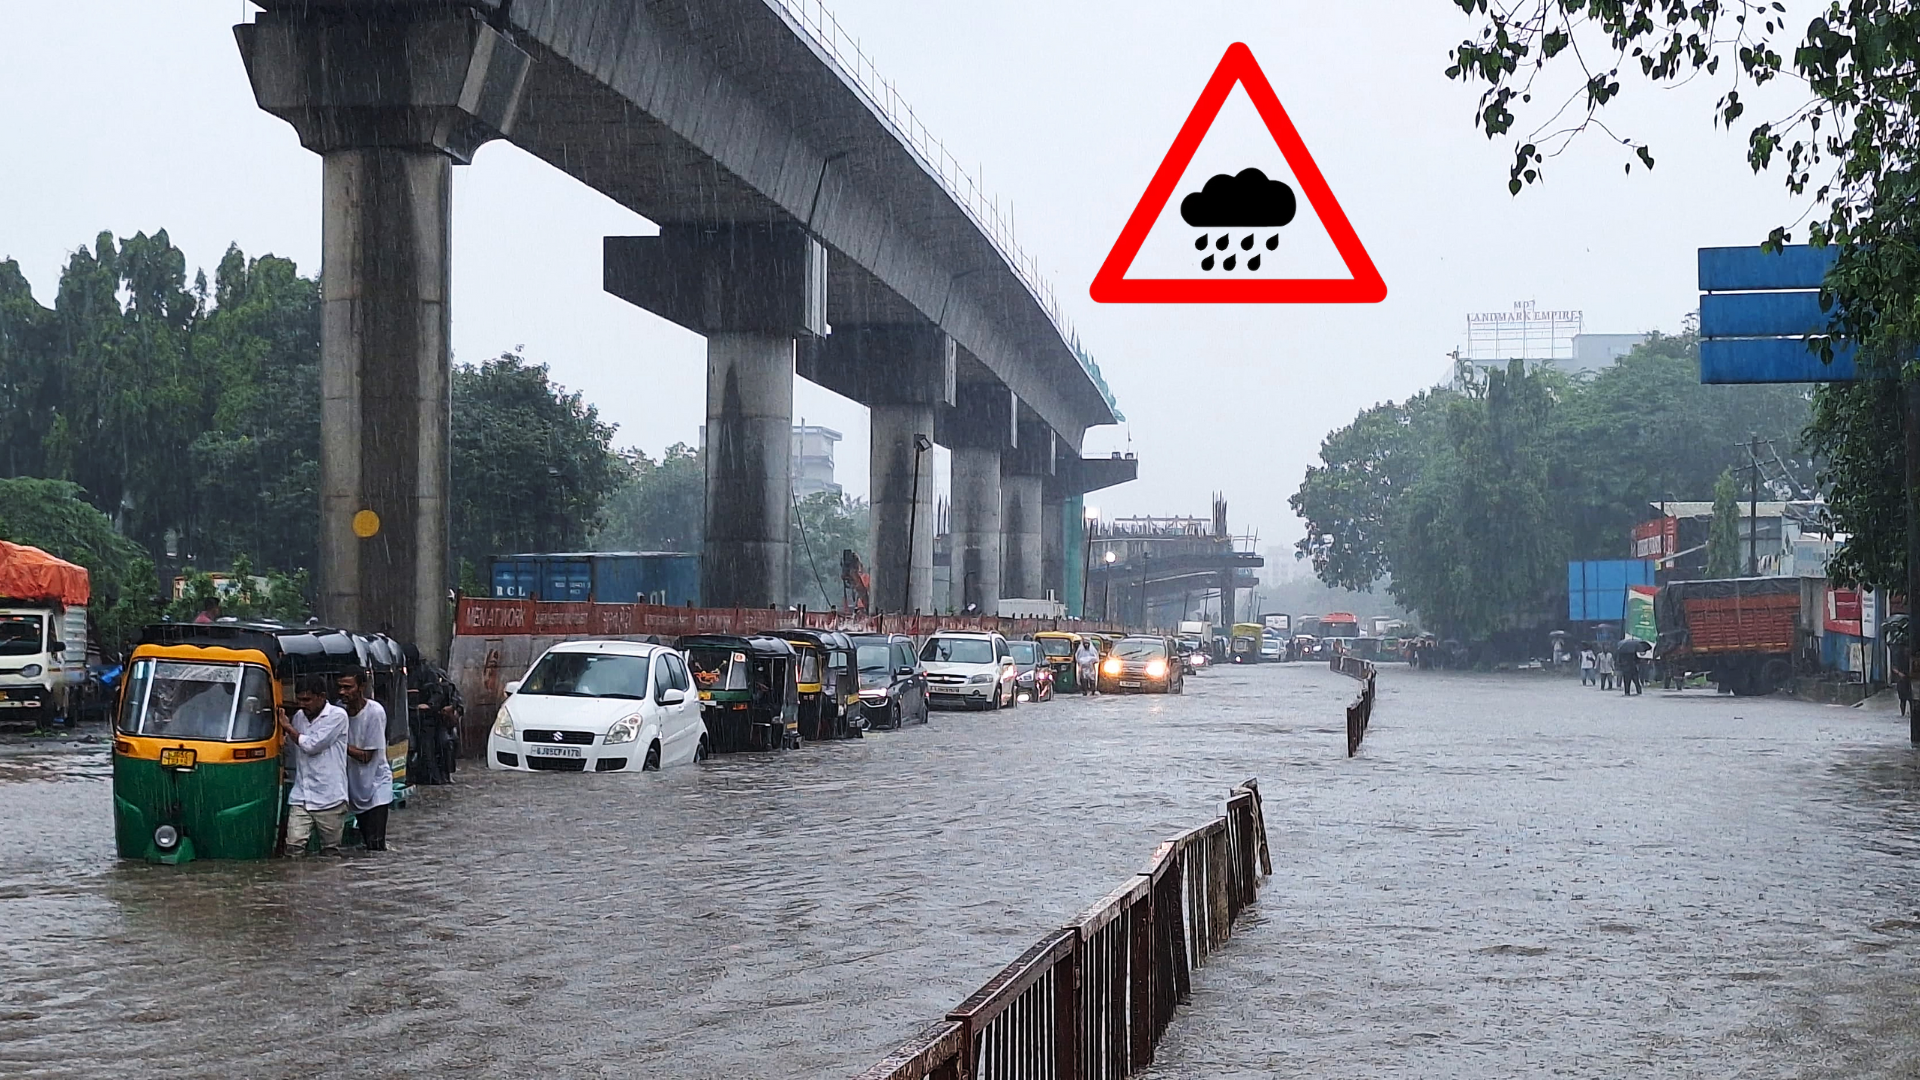 Mumbai Rain: IMD Issues ‘Red Alert’ For Heavy Showers; Trains And Flights Cancelled, Roads Blocked